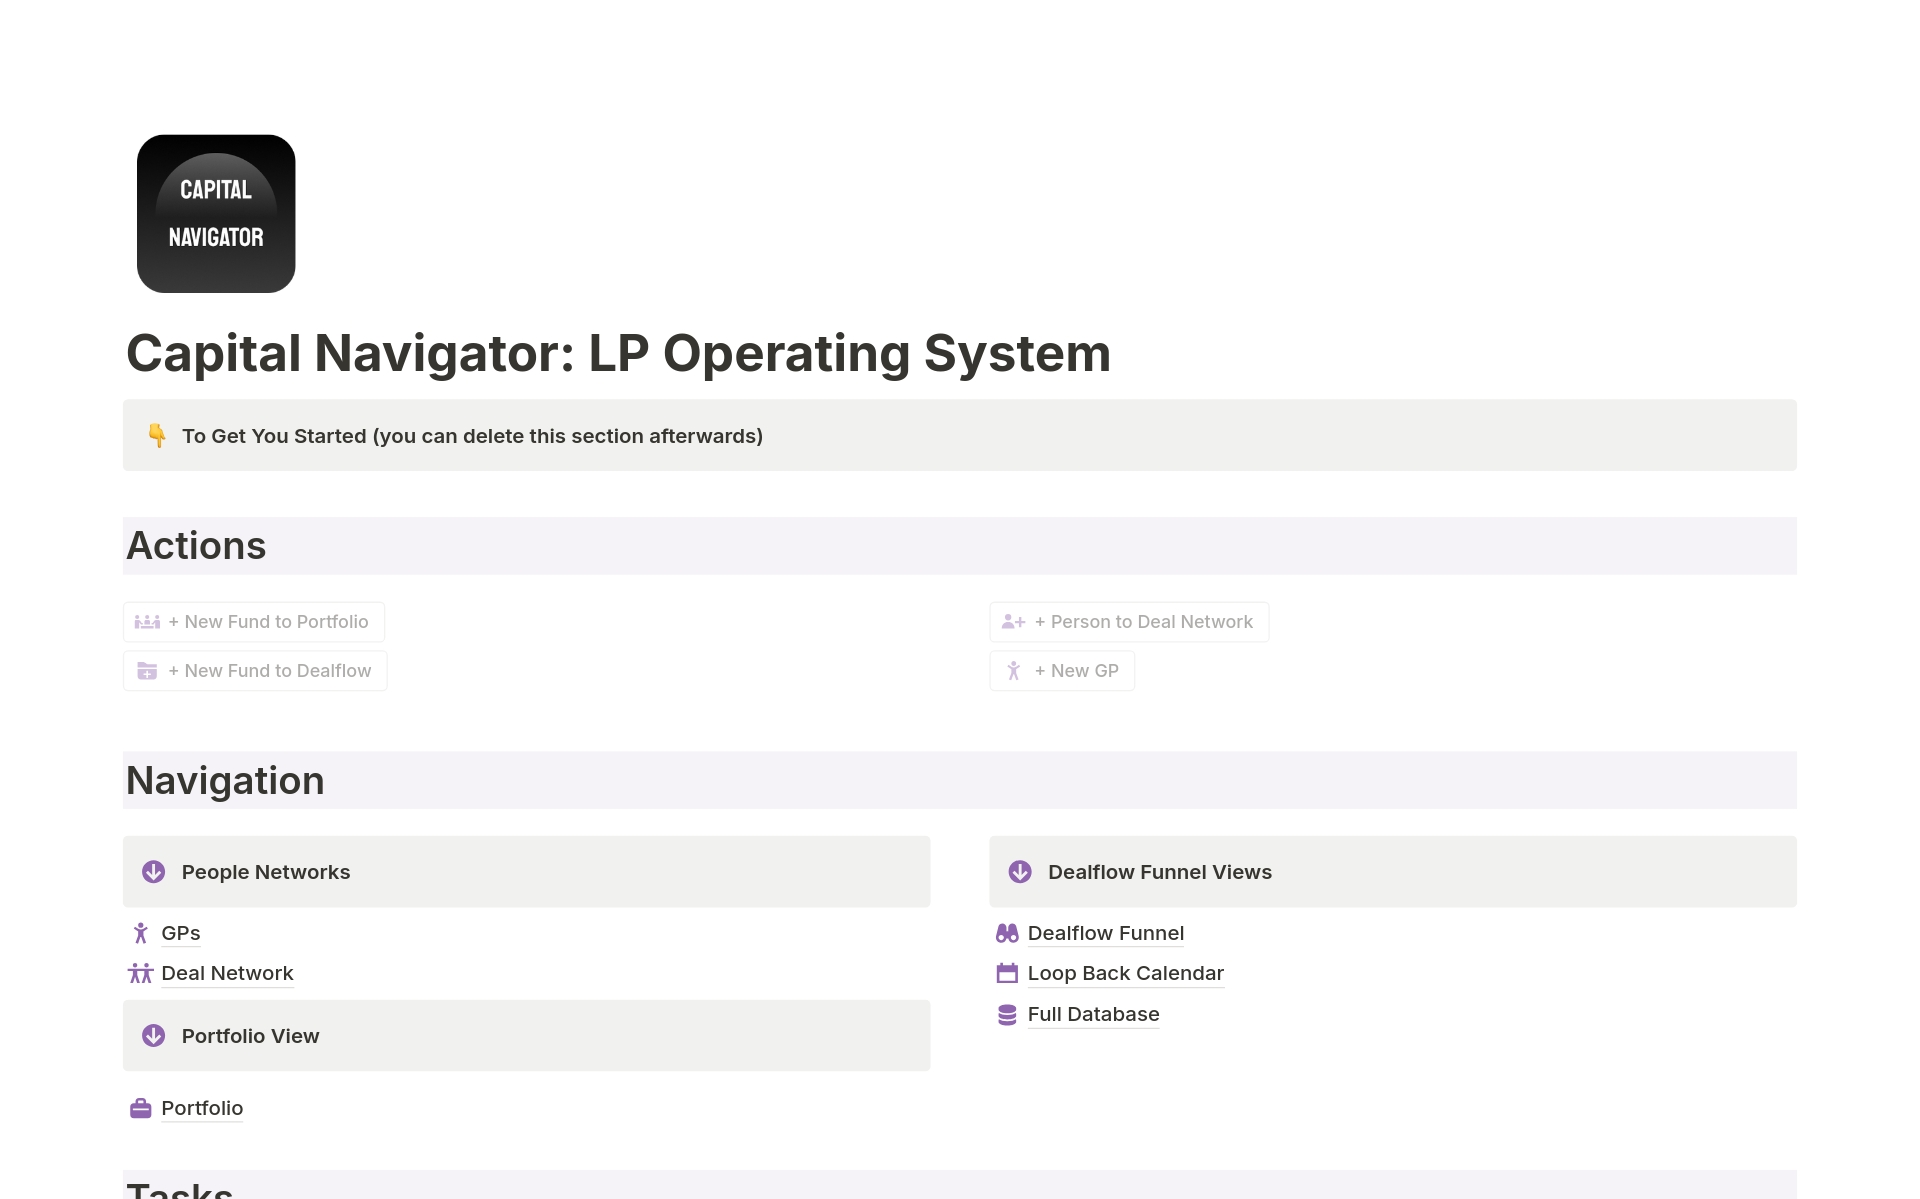 Capital Navigator: The LP Operating System streamlines investment processes for family offices & LPs. It combines a deal flow CRM, scoring, document management, and task tracking, with easy navigation and comprehensive people networks. Manage your VC deal flow and portfolio effor